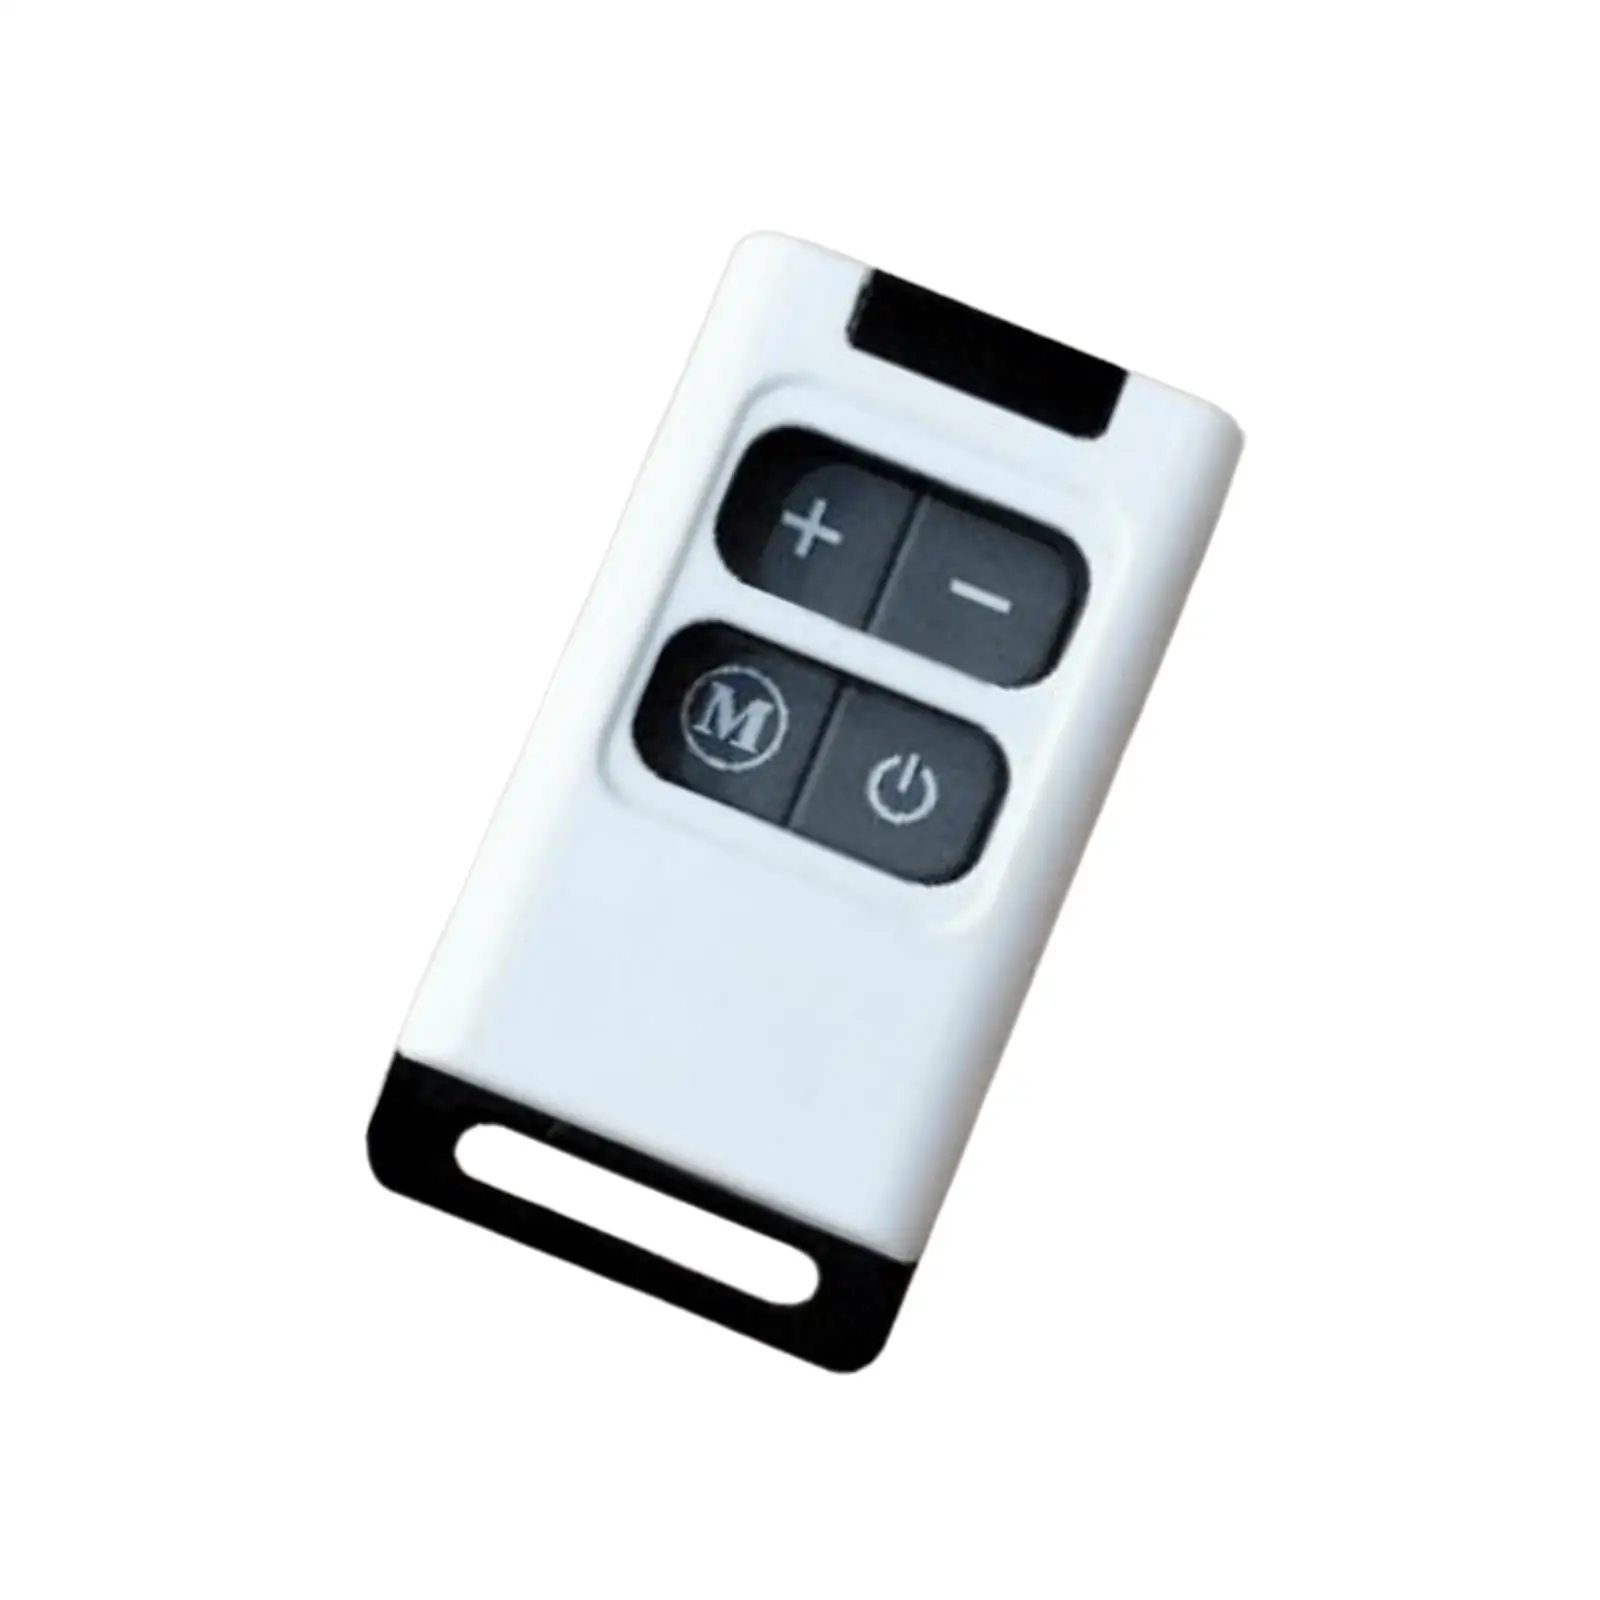 Car Parking Heater Remote Control Universal for Heater Controller Vehicle Air Parking Heater Vehicle RV Heating Accessories